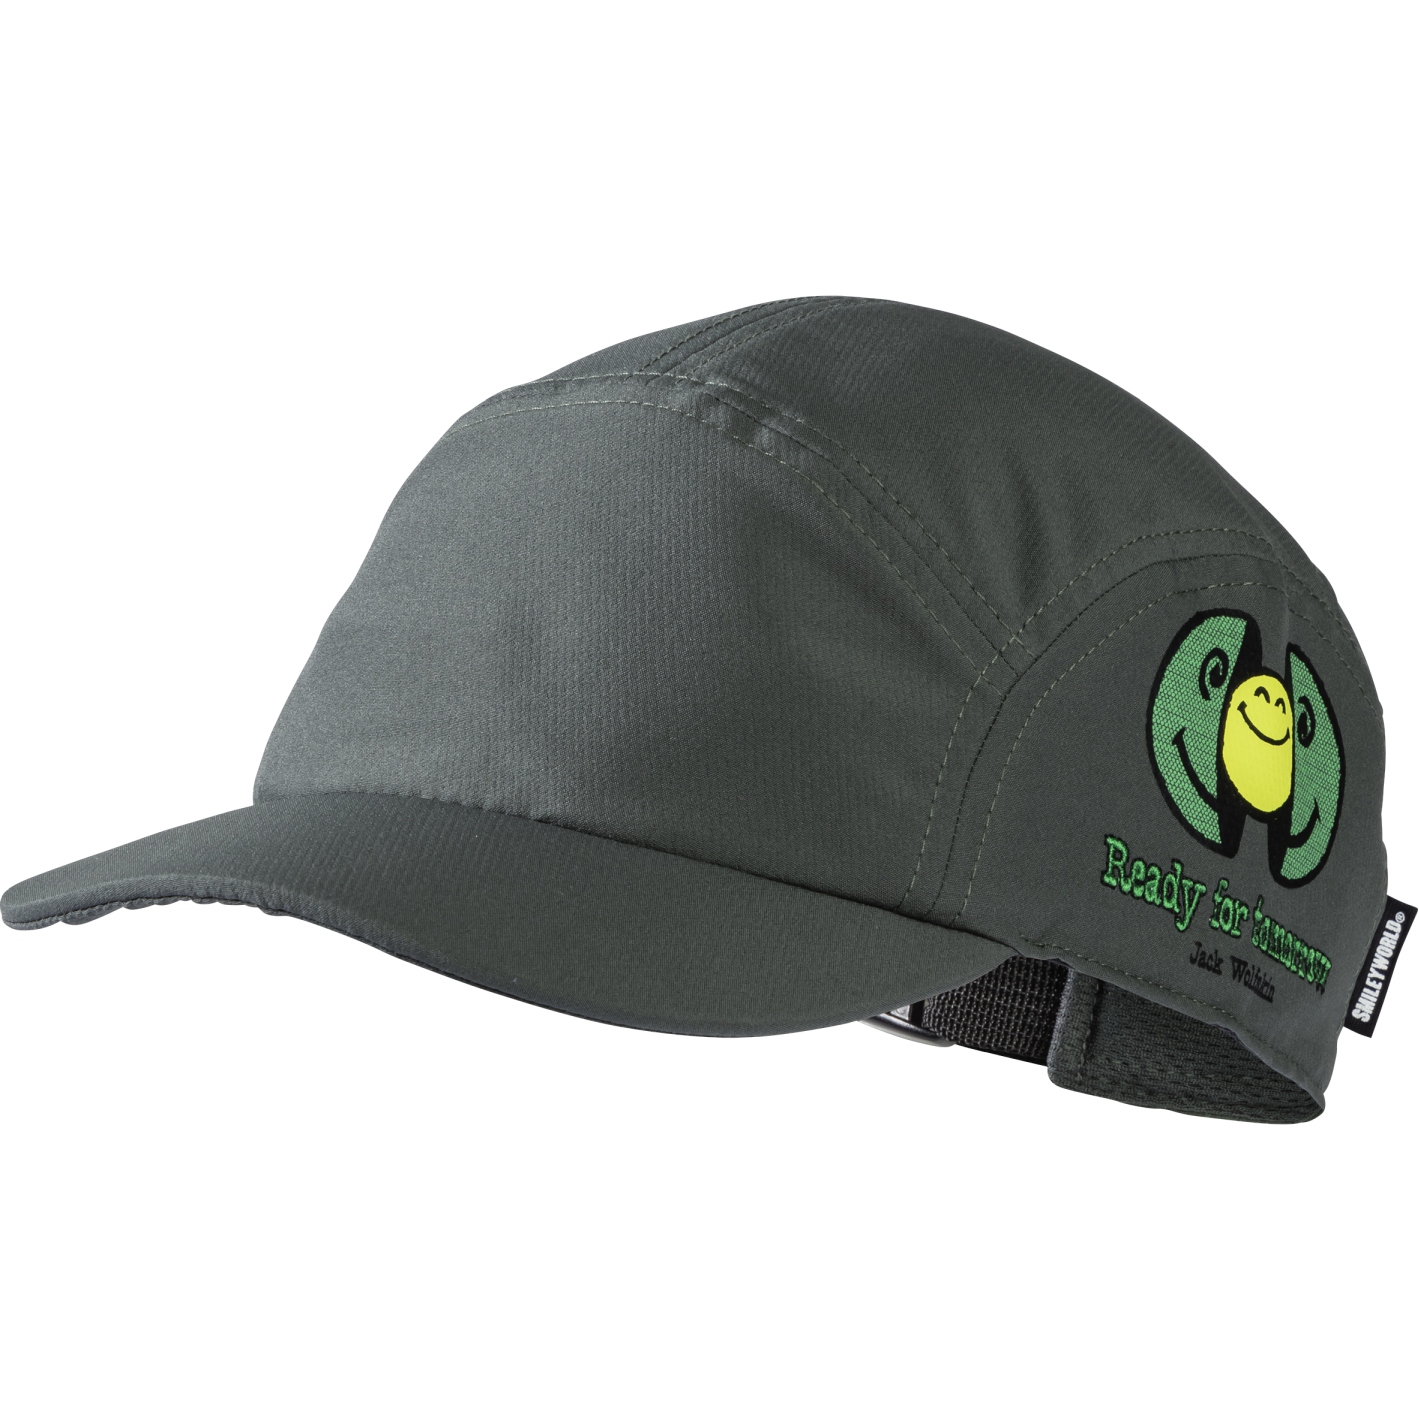 Picture of Jack Wolfskin Smileyworld Cap Youth - slate green